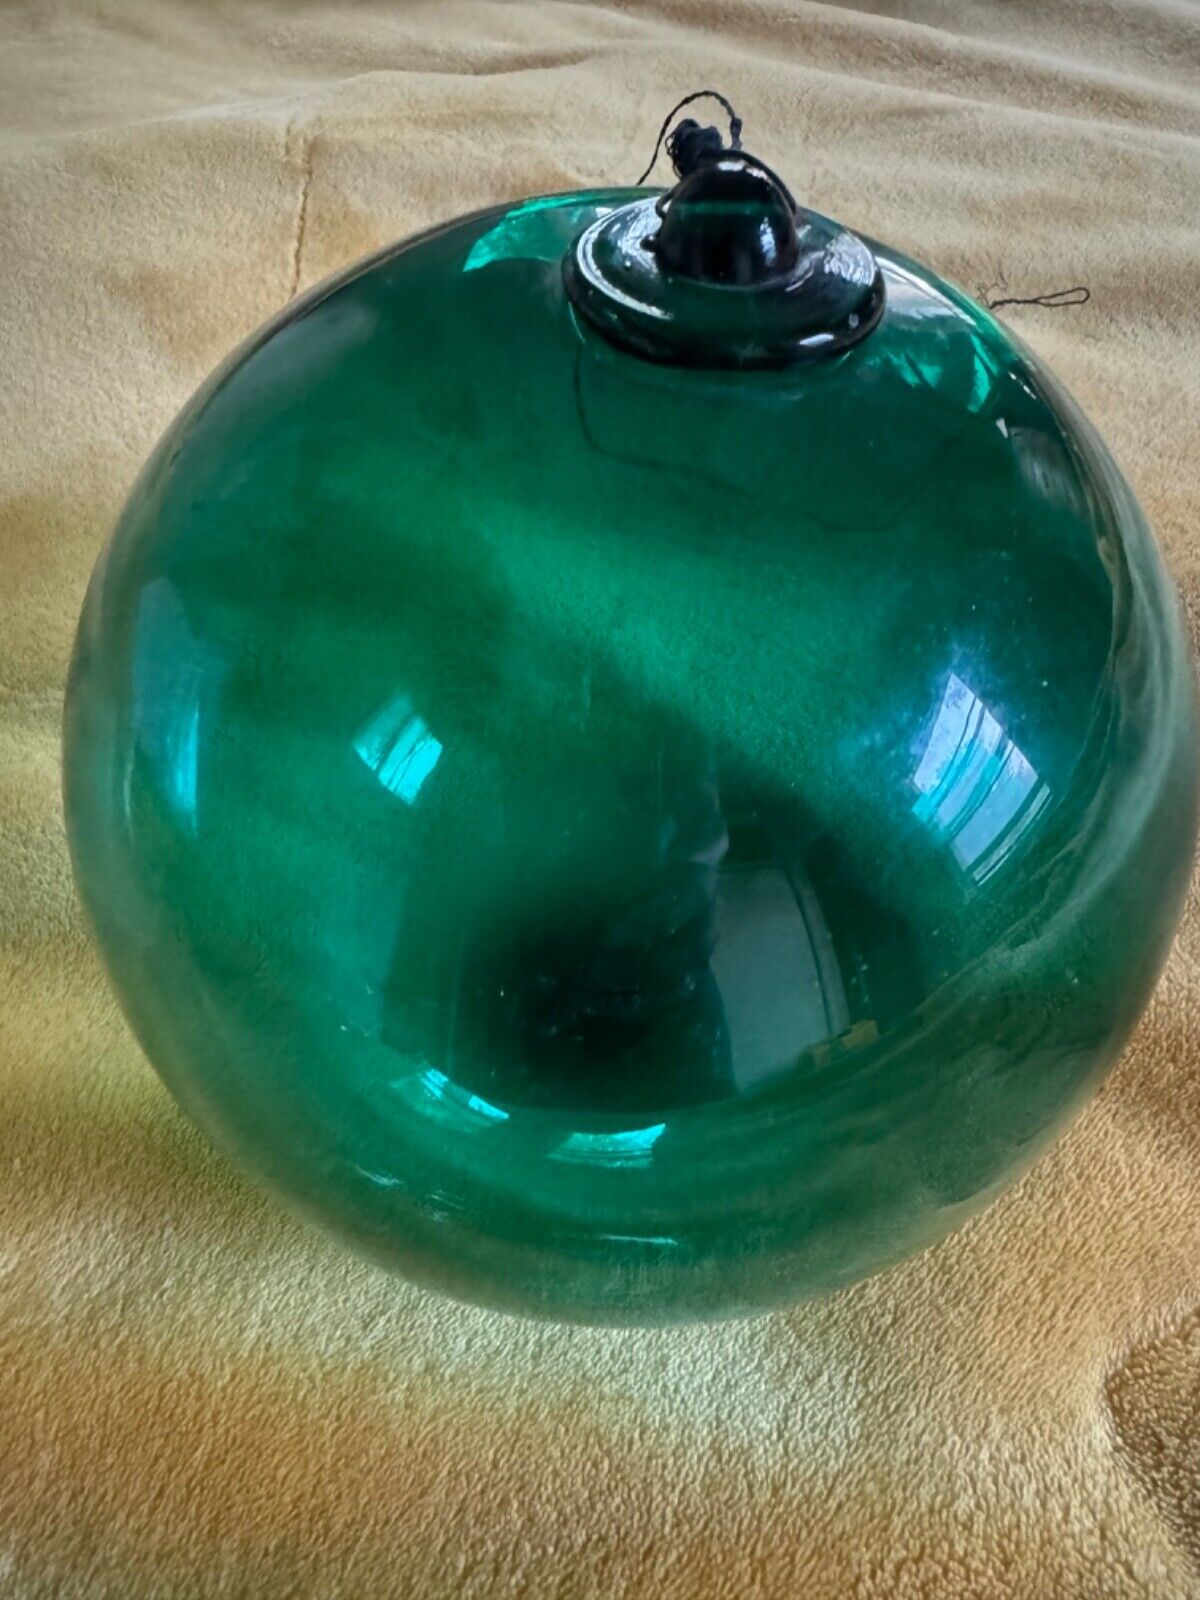 Large Antique Green Glass Fishing Float 10-11 inches (possibly Japanese)